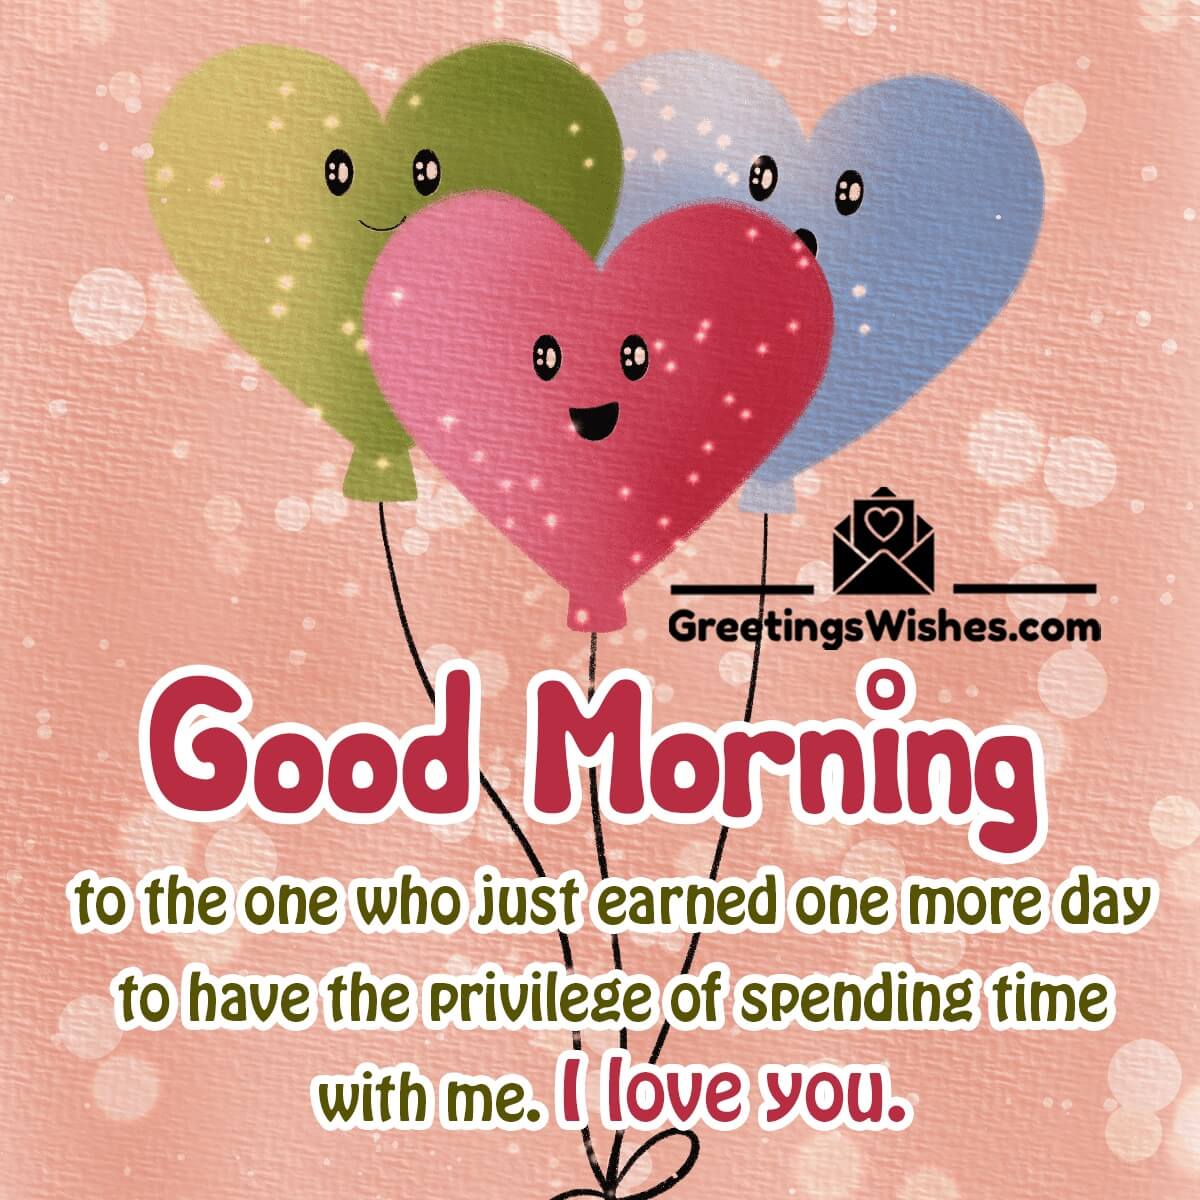 Funny Good Morning Messages - Greetings Wishes